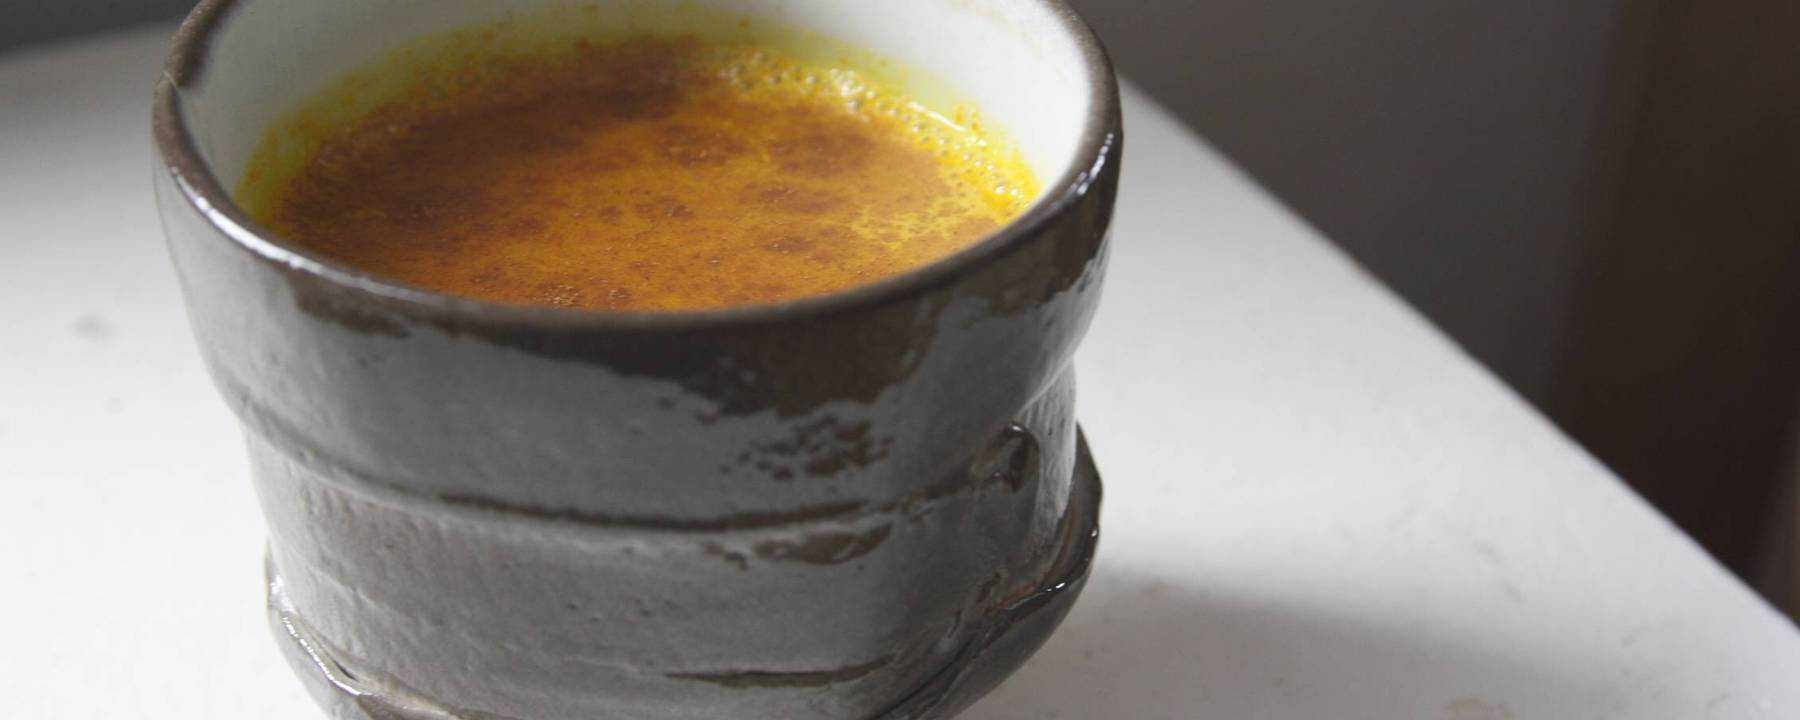 CARE Snack: Turmeric Milk (If You Like Chai, Try This)